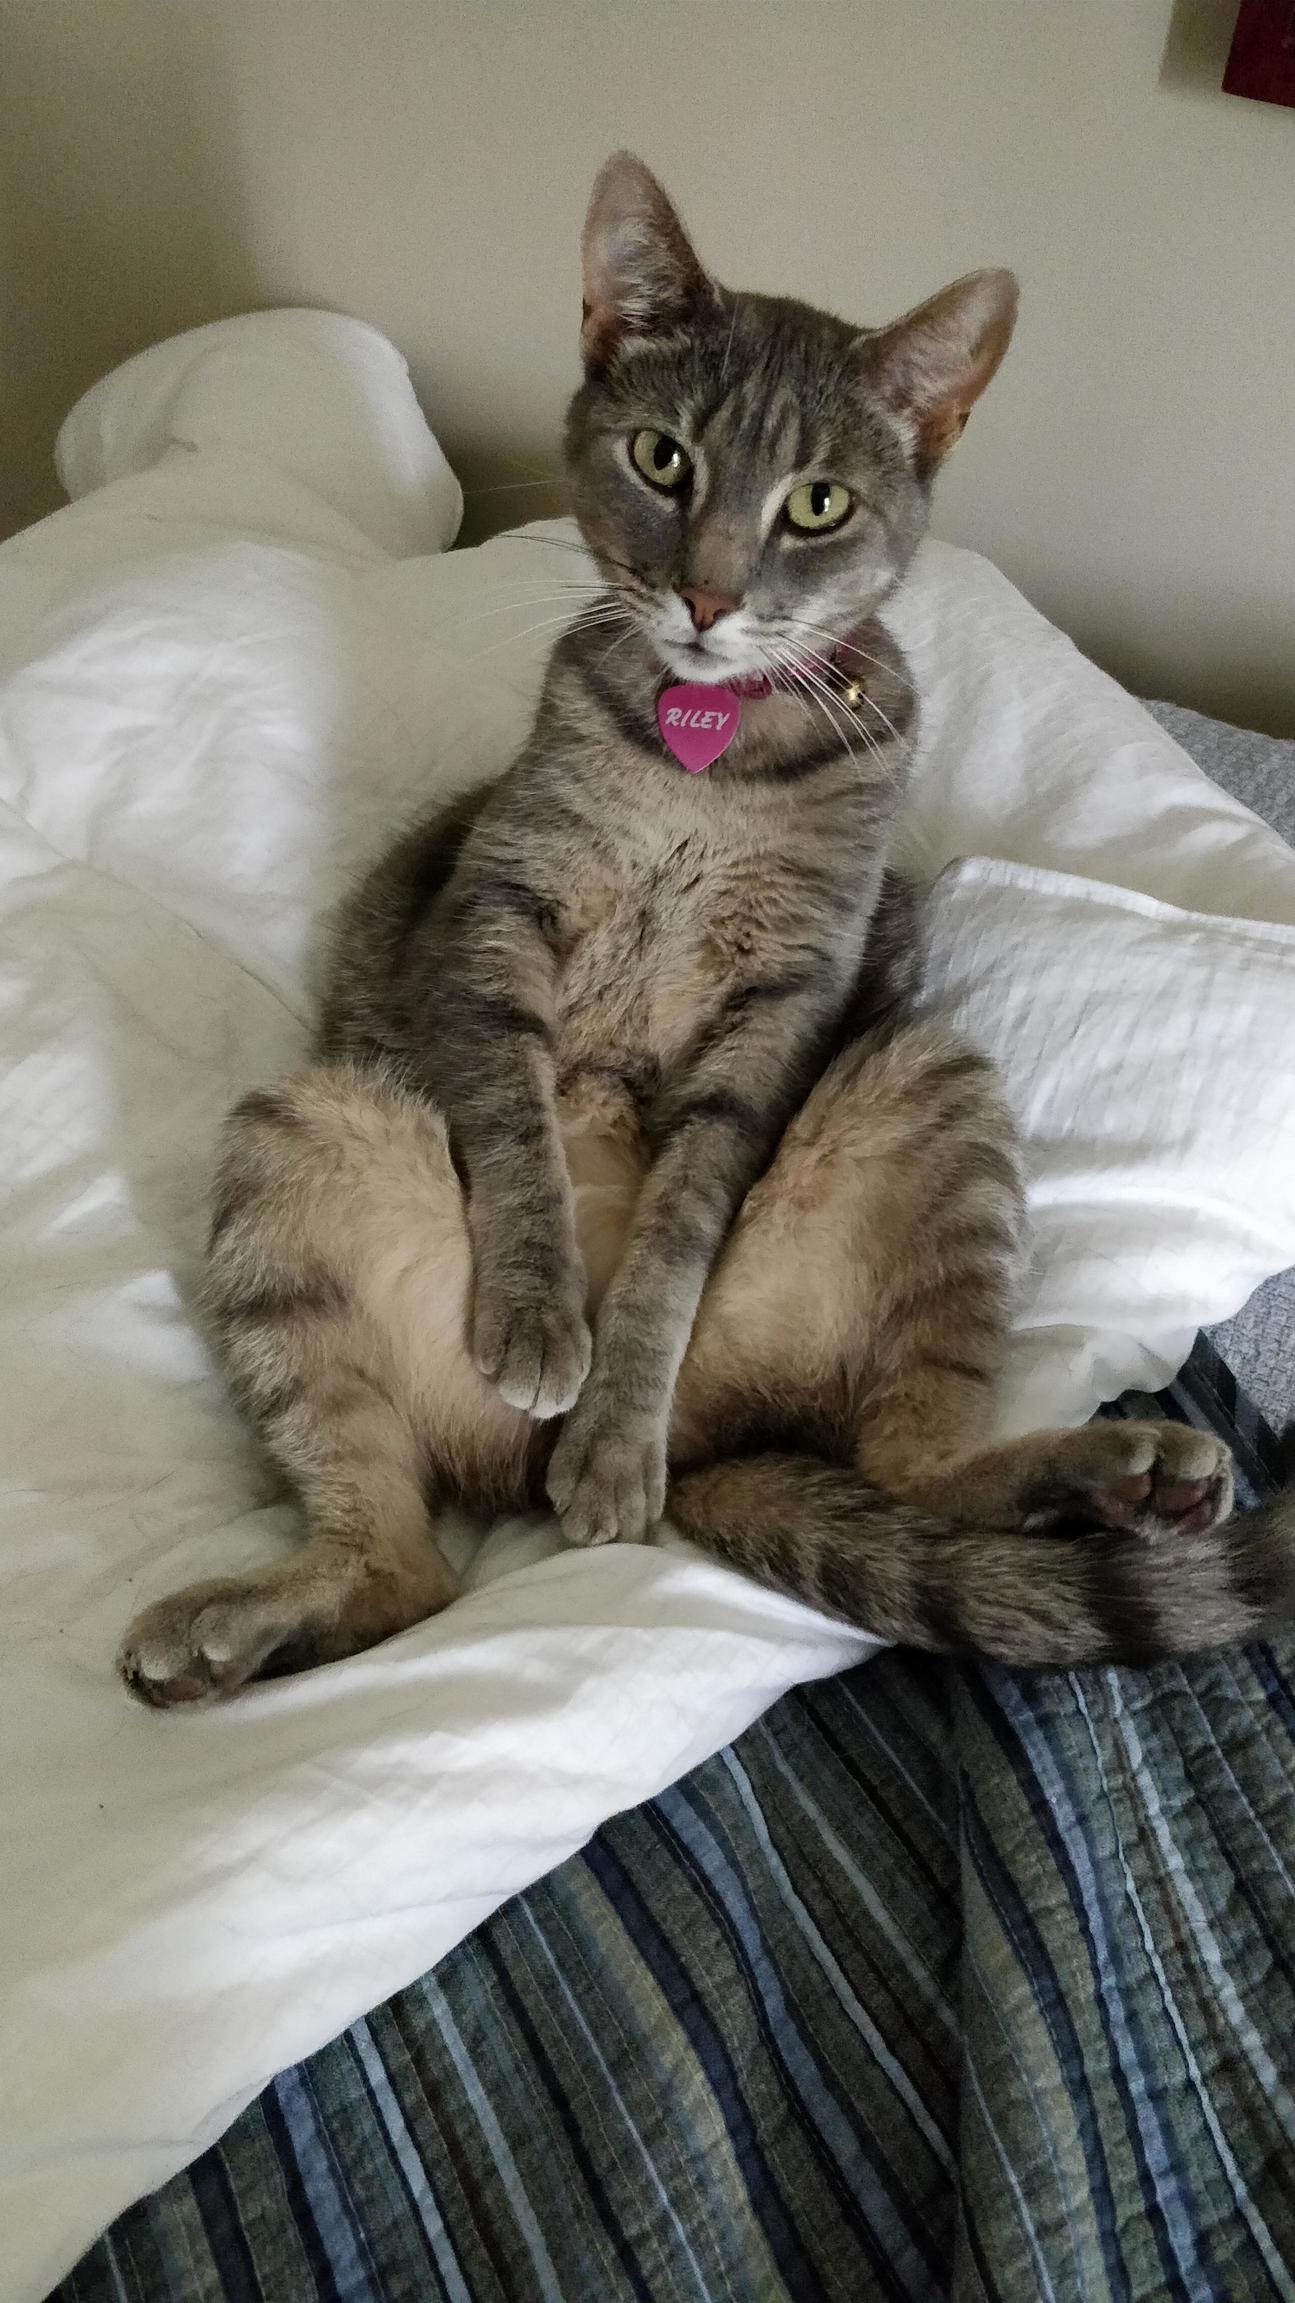 My cat sits like this when she cleans herself